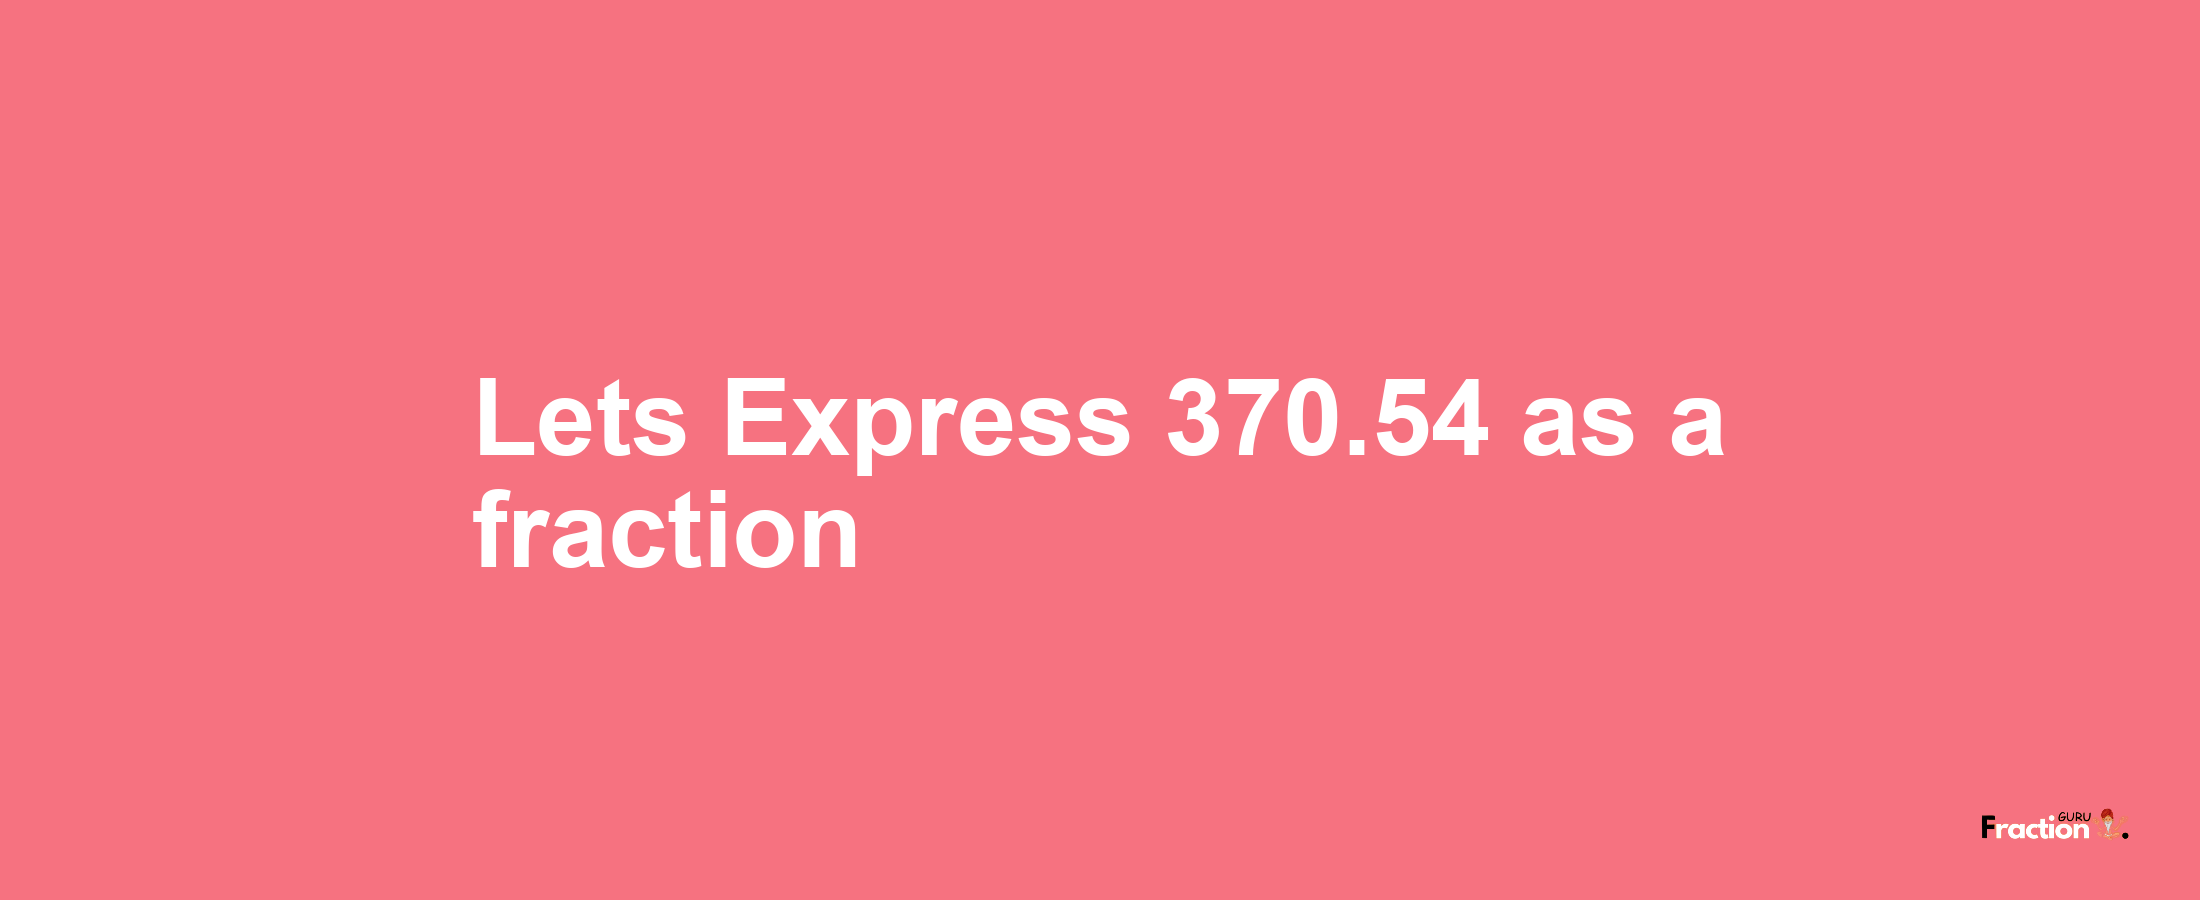 Lets Express 370.54 as afraction